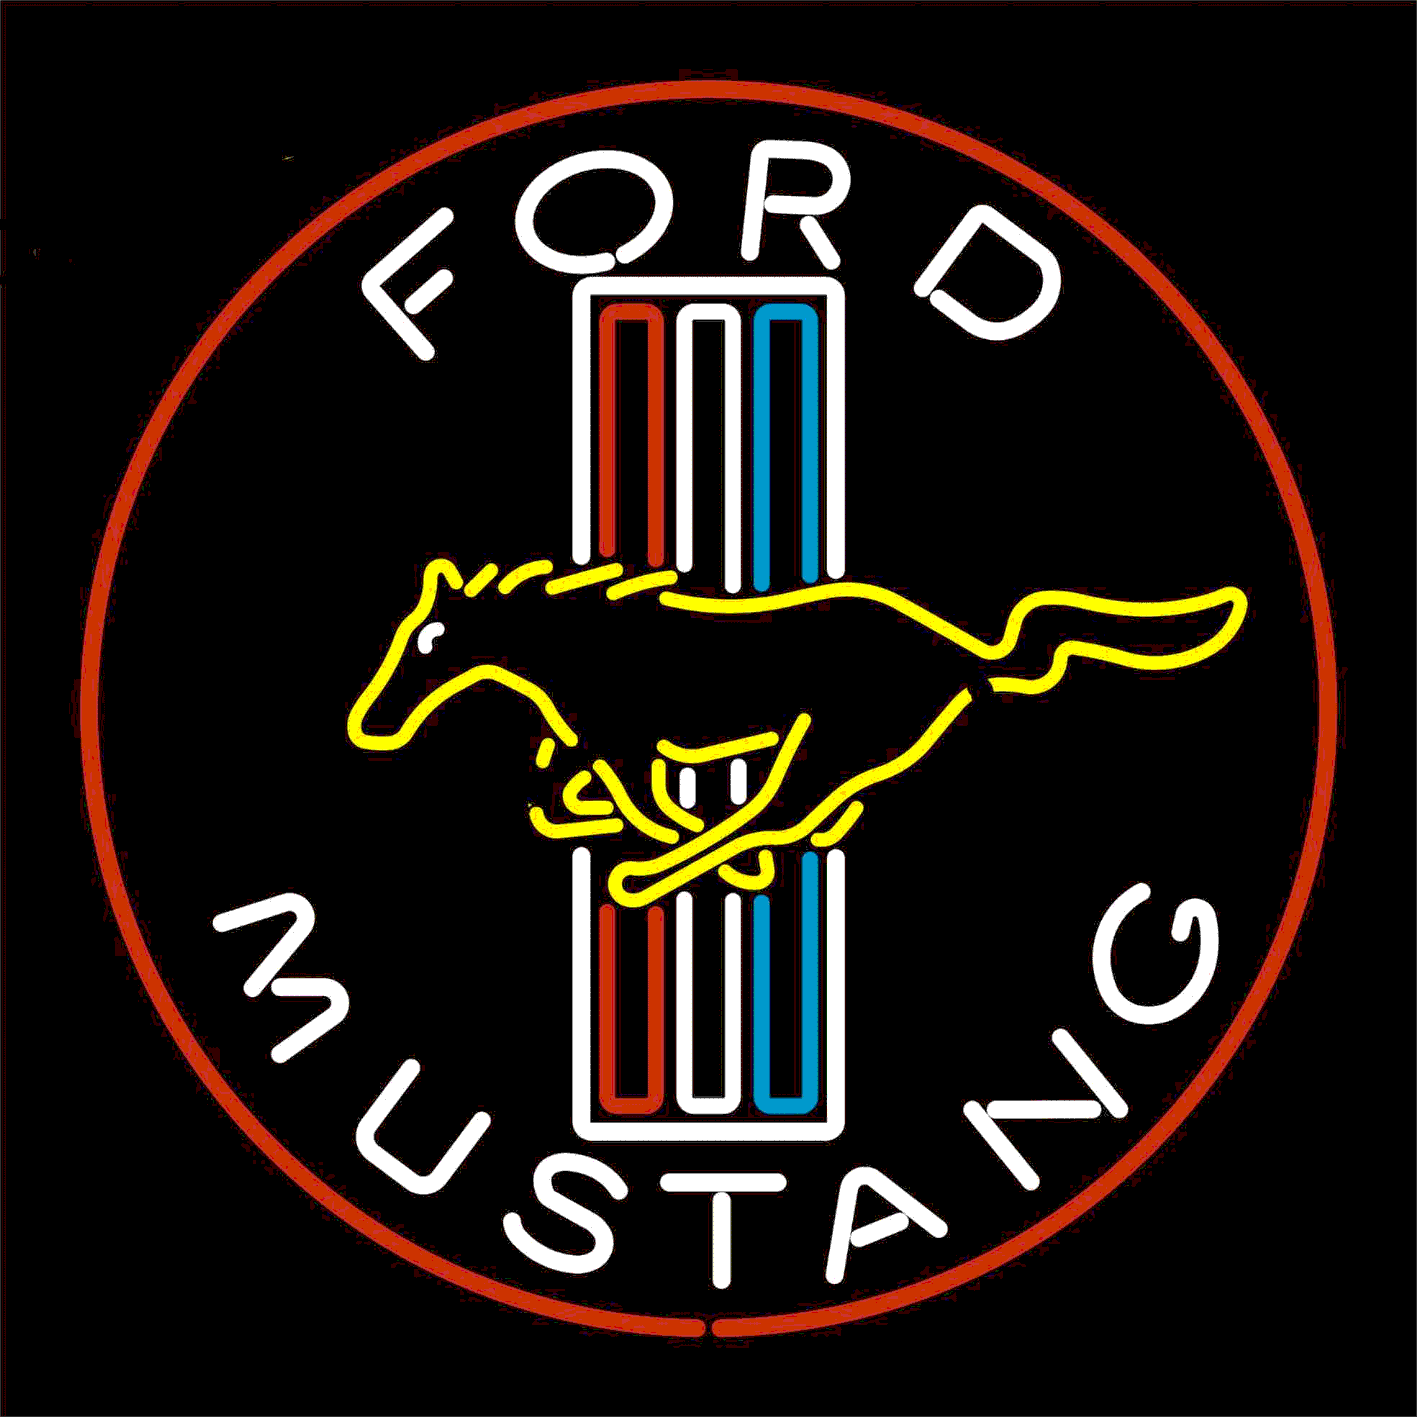 Cool New Ford Logo - Free Ford Mustang Logo, Download Free Clip Art, Free Clip Art on ...